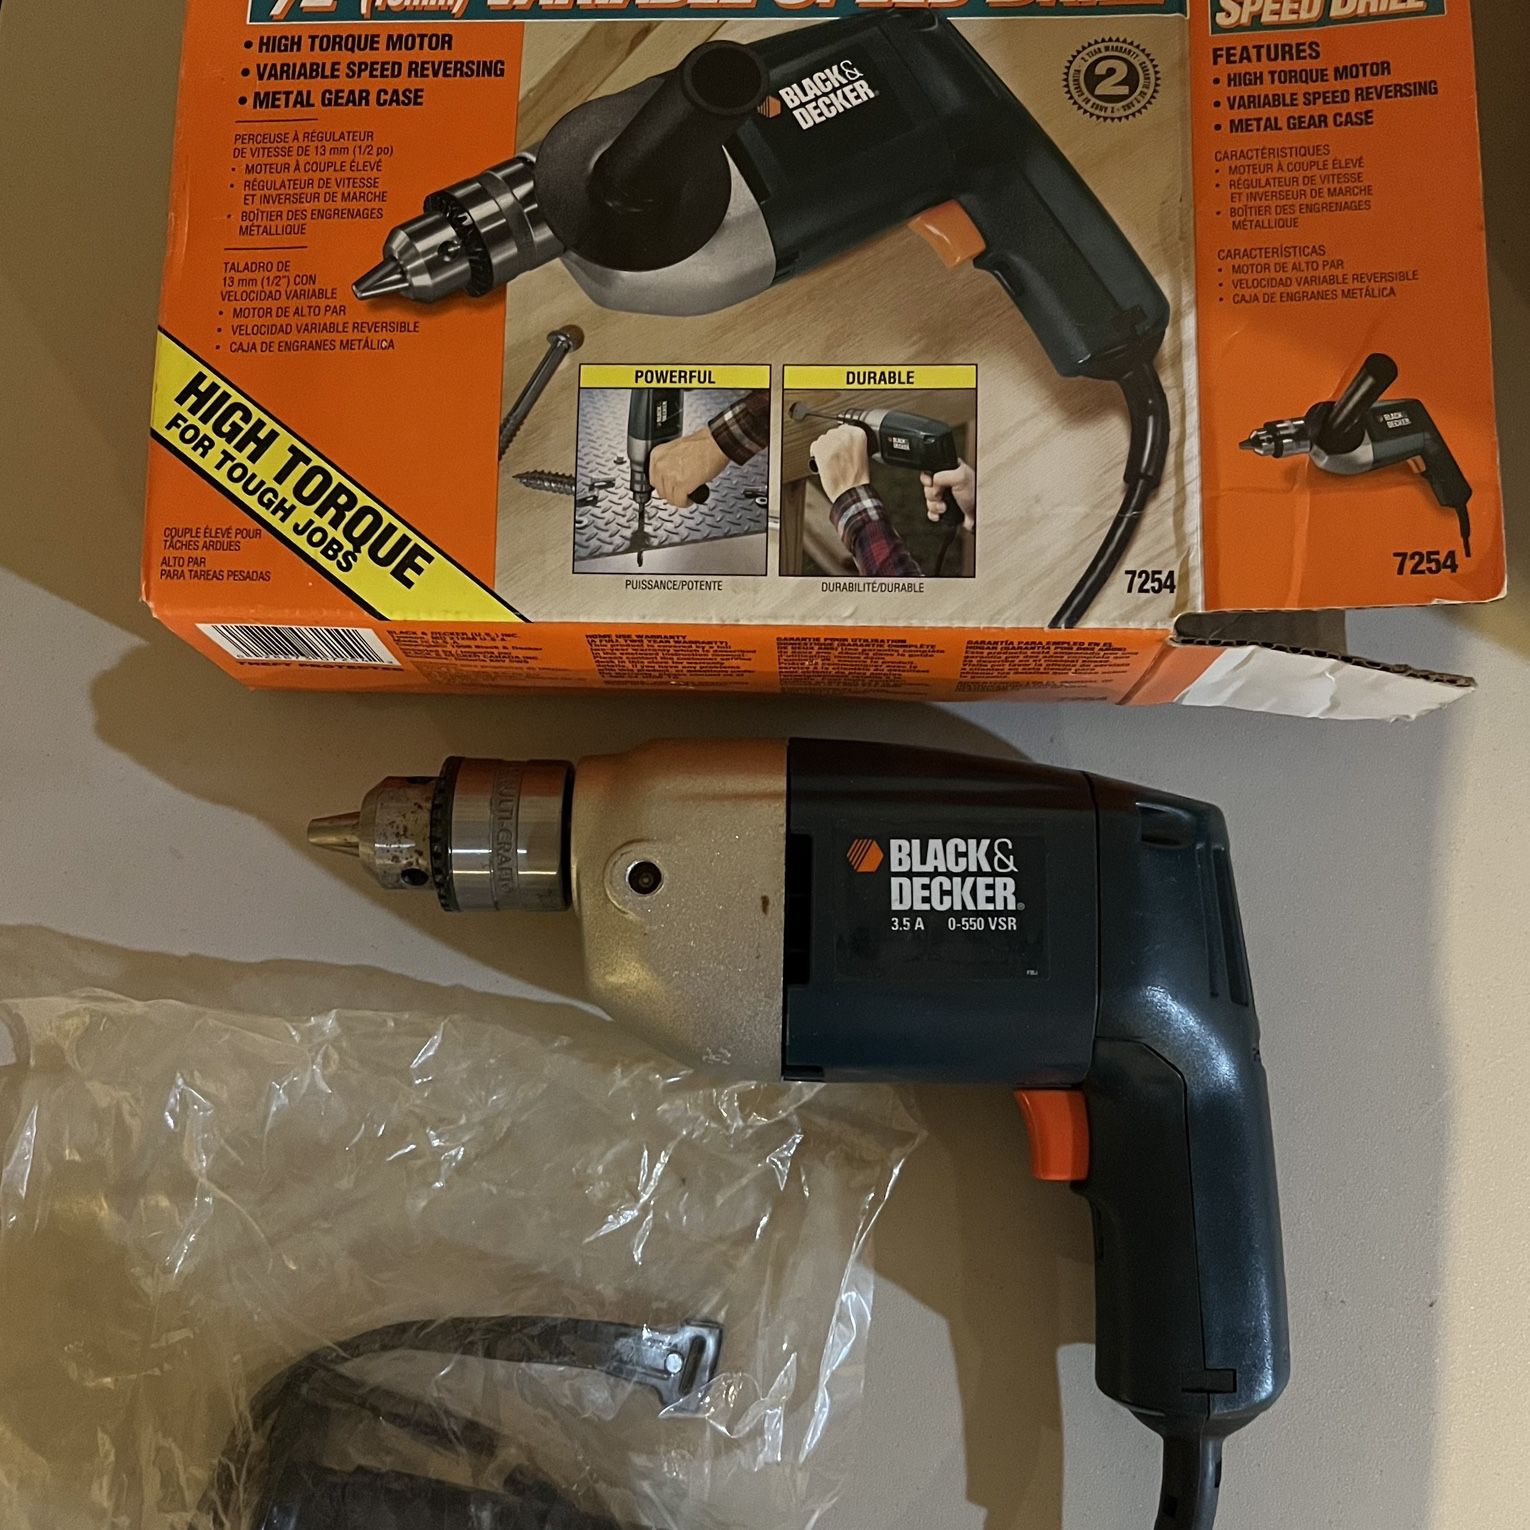 BLACK+DECKER 20V MAX* POWERECONNECT Cordless Drill/Driver + 30 pc. Kit ( LD120VA) for Sale in Queens, NY - OfferUp